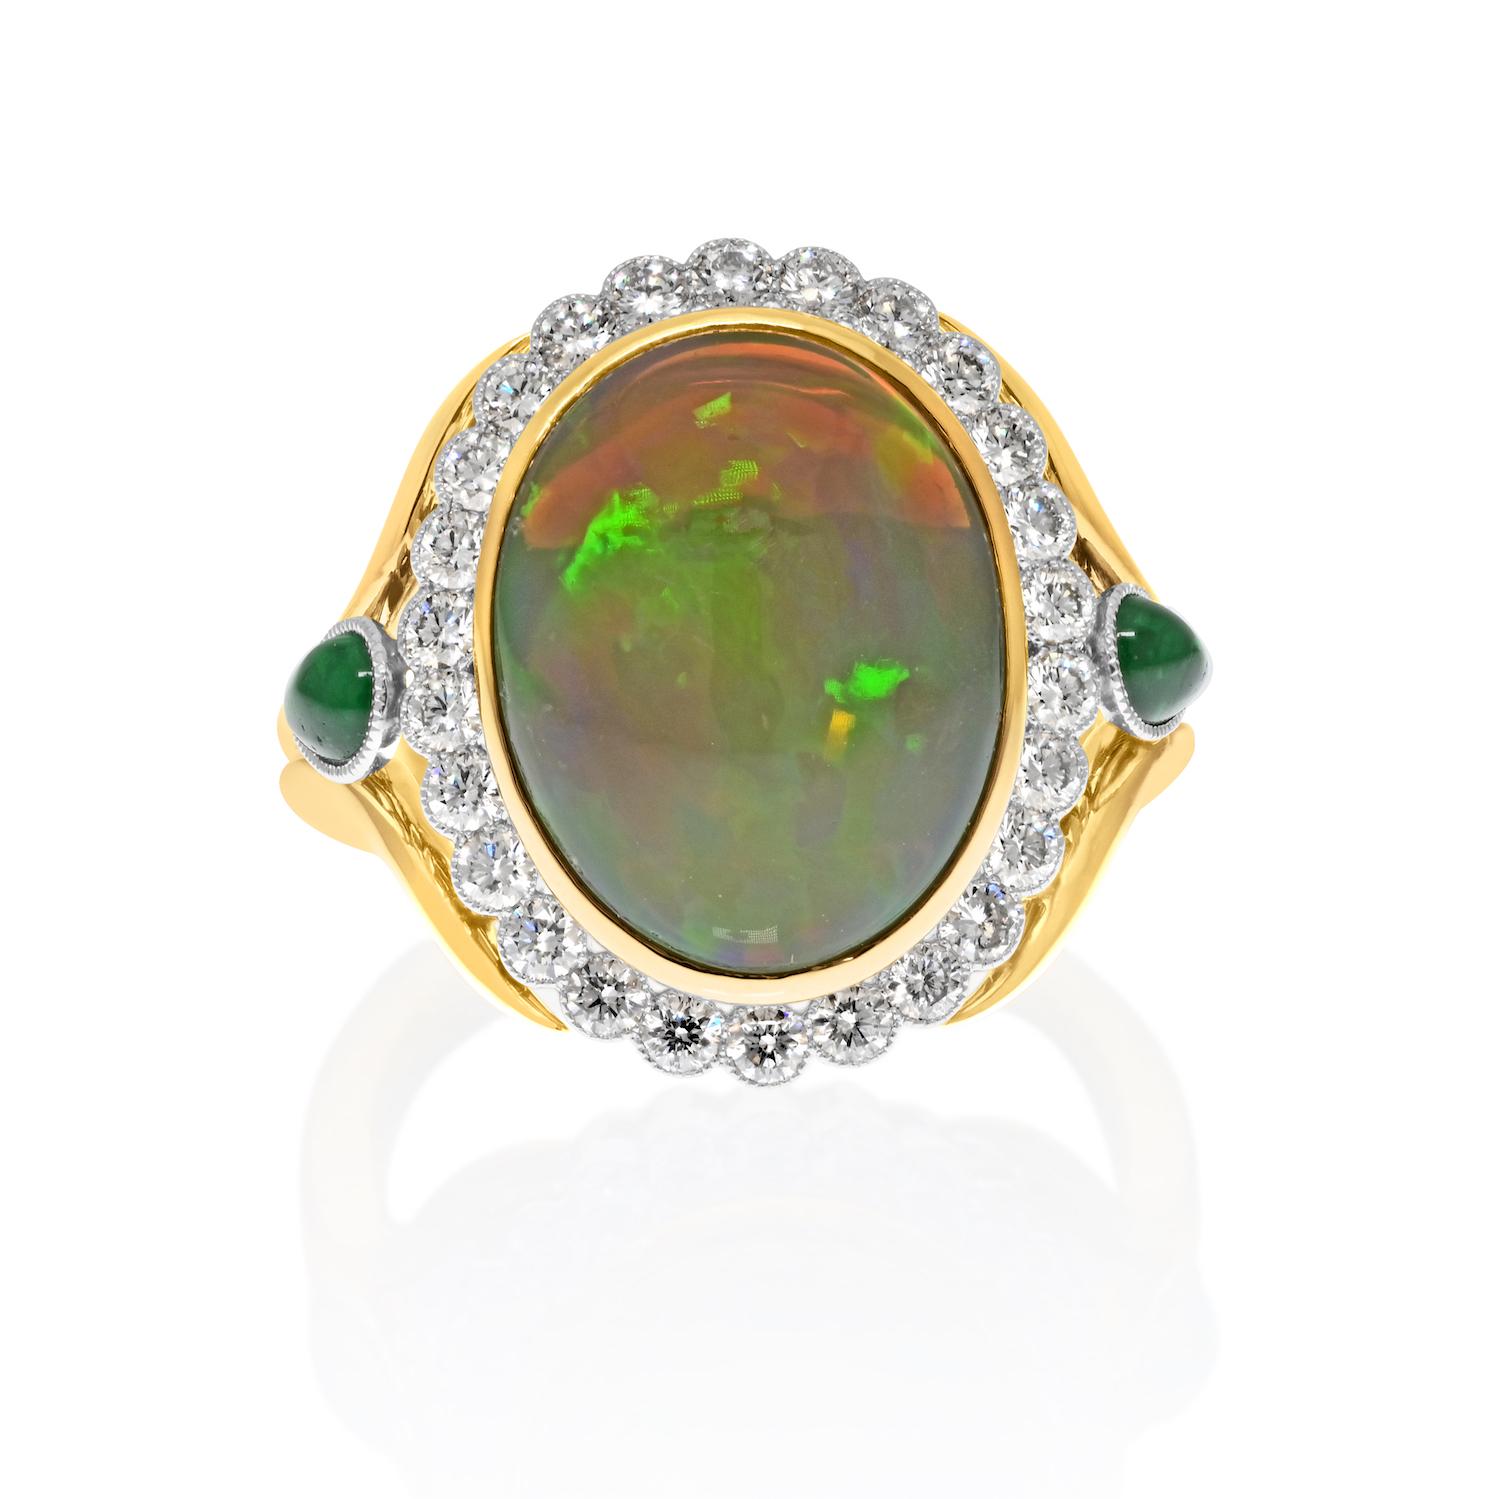 Estate Style Opal Ring: Captivating Elegance in Every Detail.

Embrace timeless elegance with this exquisite estate-style opal ring. At its heart, a magnificent oval opal cabochon, weighing a stunning 6.84 carats, takes center stage in a delicate